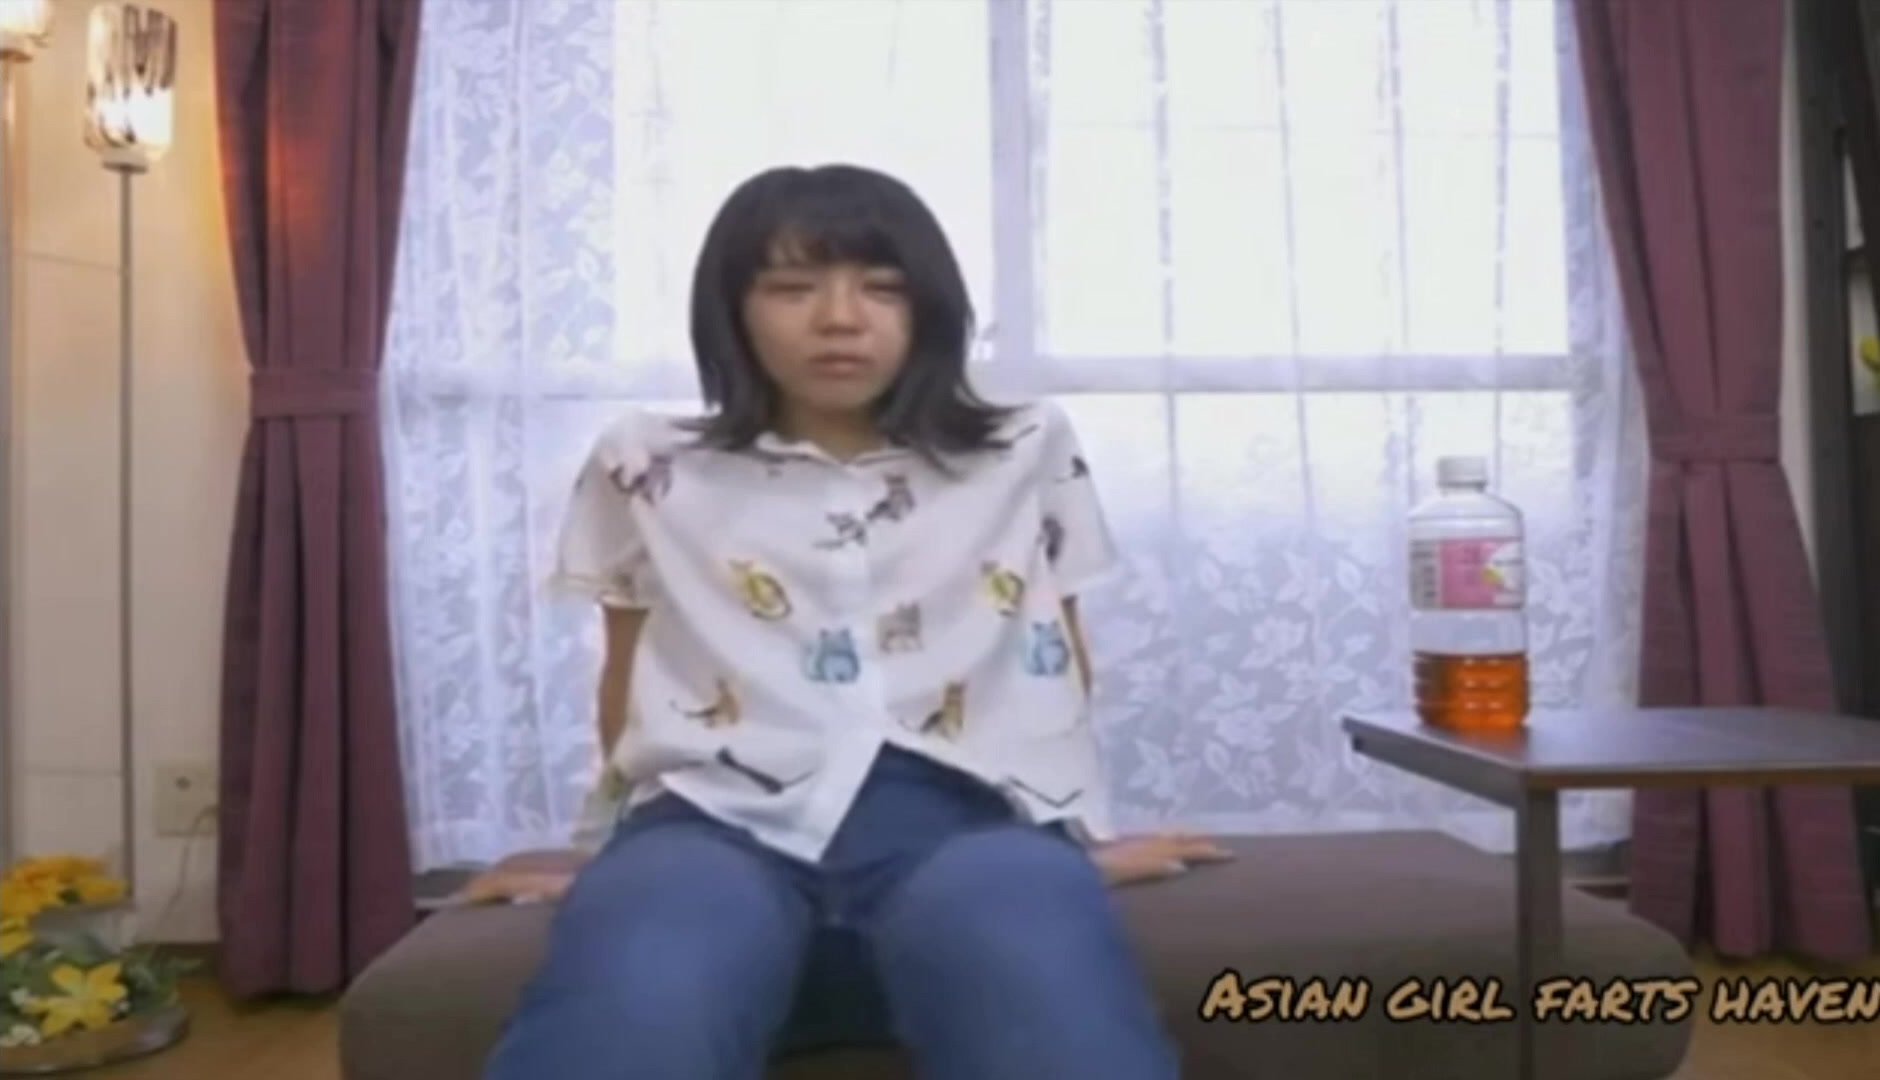 Japanese girl farts in jeans - video 2